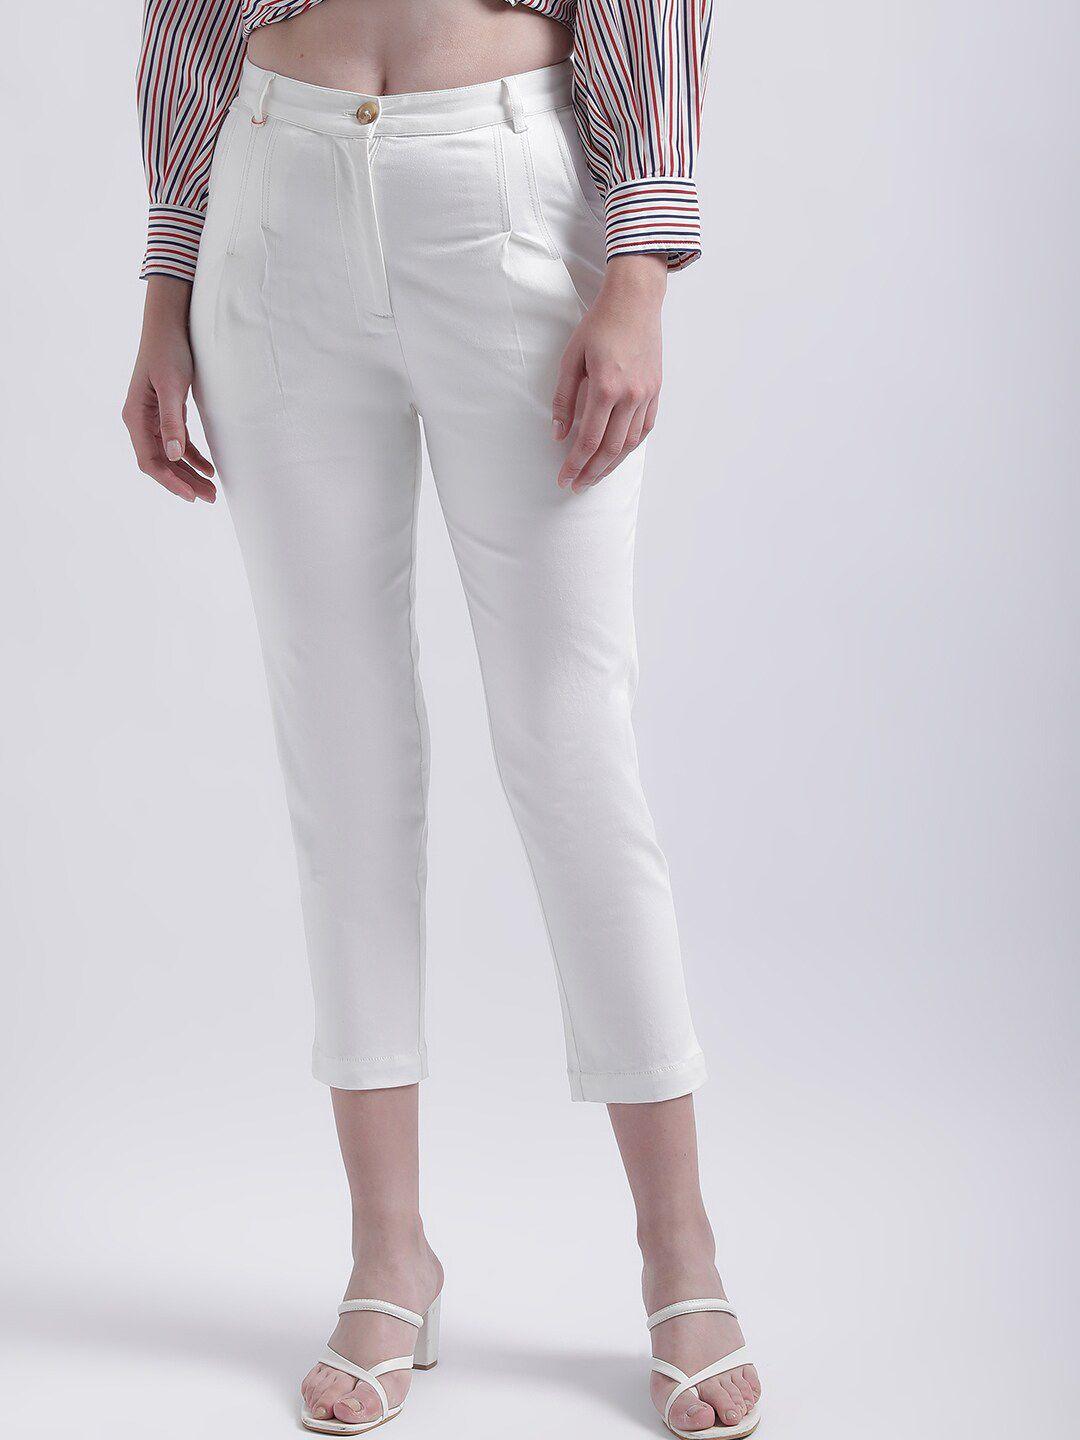 iconic-women-mid-rise-cigarette-trousers